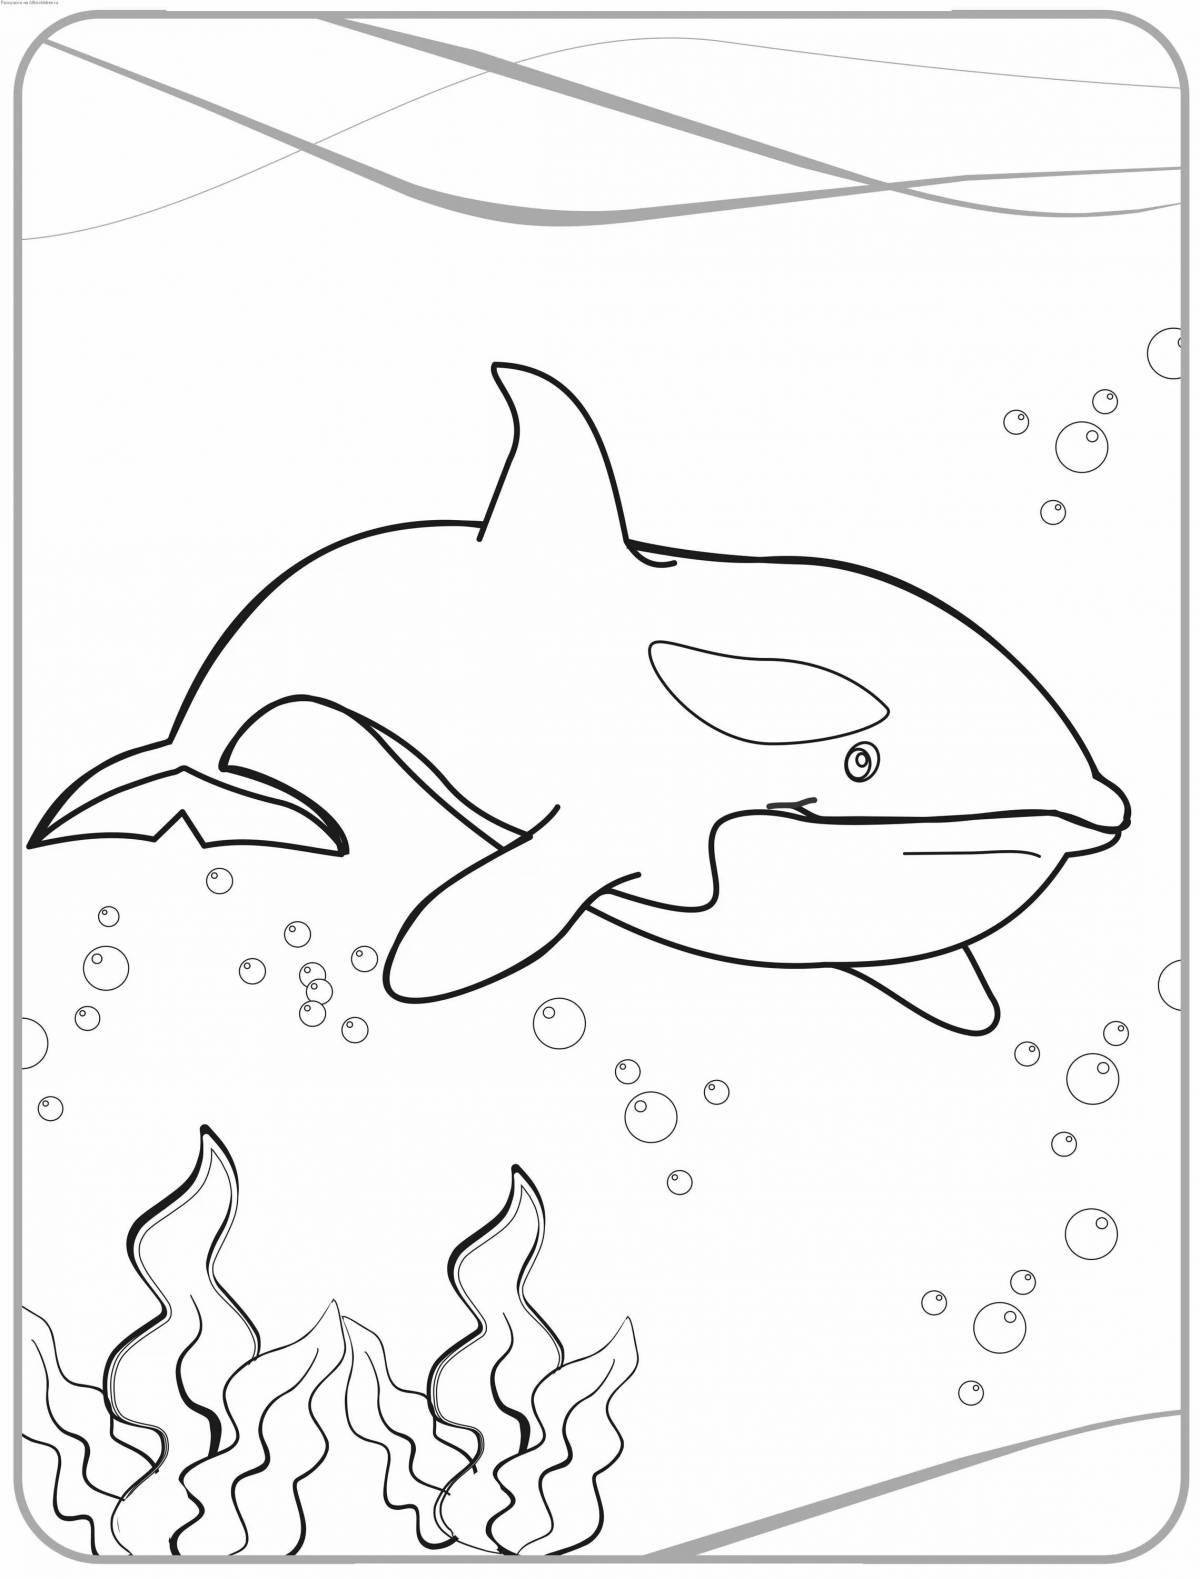 Impressive killer whale coloring page for kids